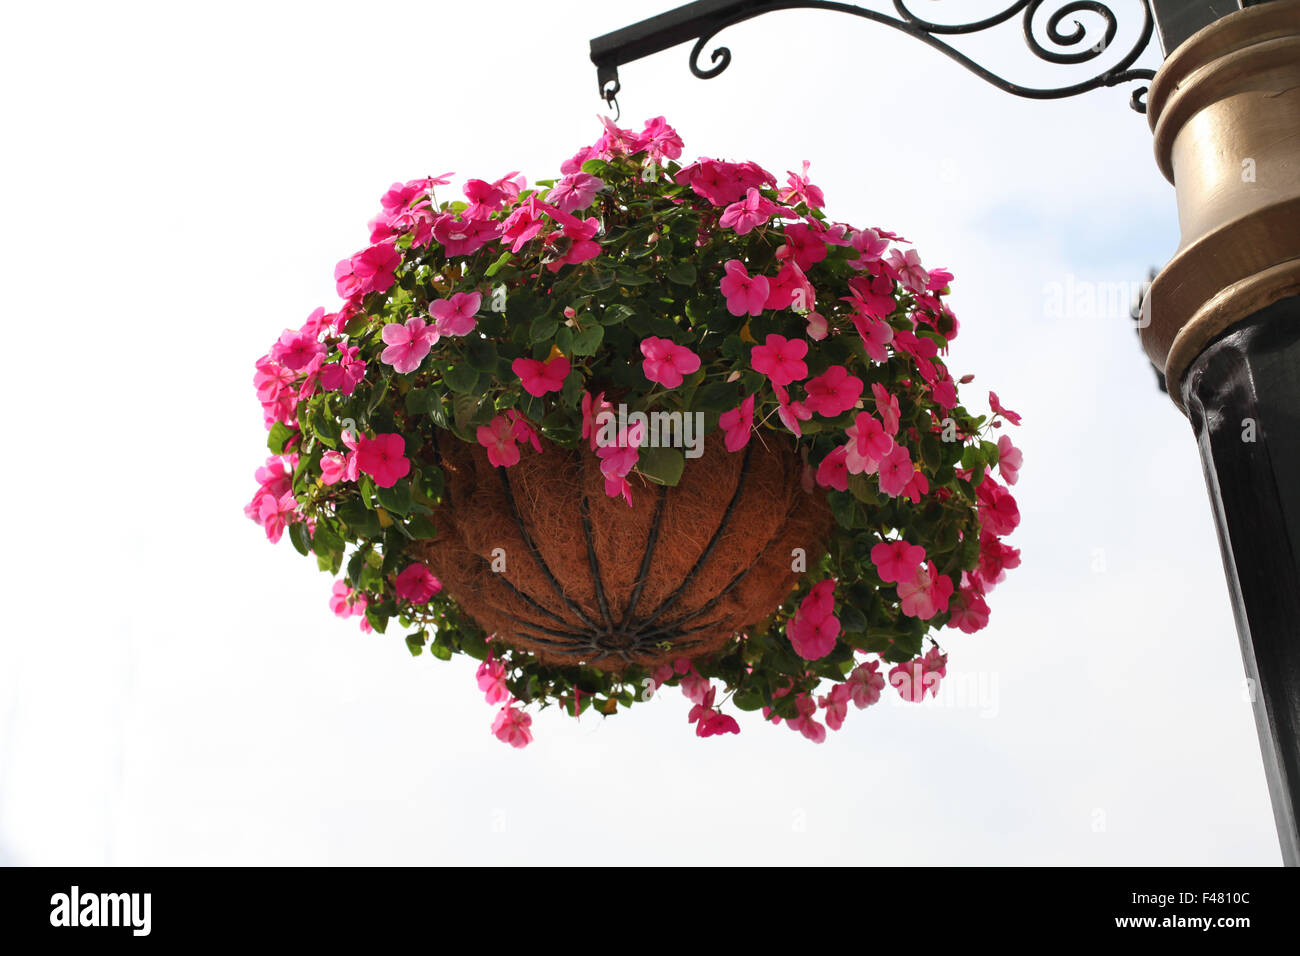 It's a photo of a bunch of pink flowers in a pot hang to a pillar or column in the street Stock Photo